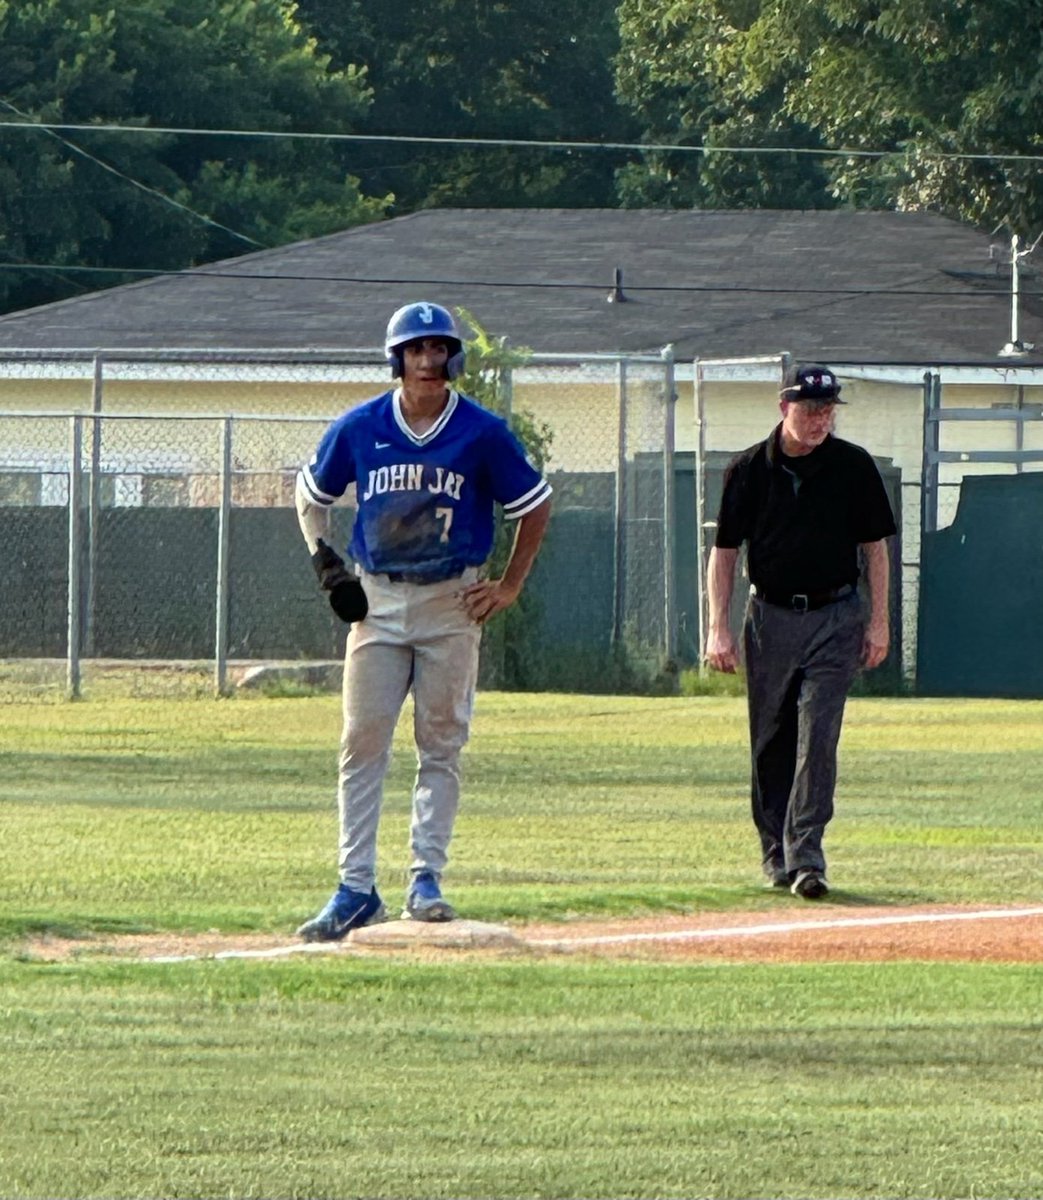 Congrats to @_diegoquiroz on being selected to play in the @SABaseballCoach All Star Game!  #JohnJayProud